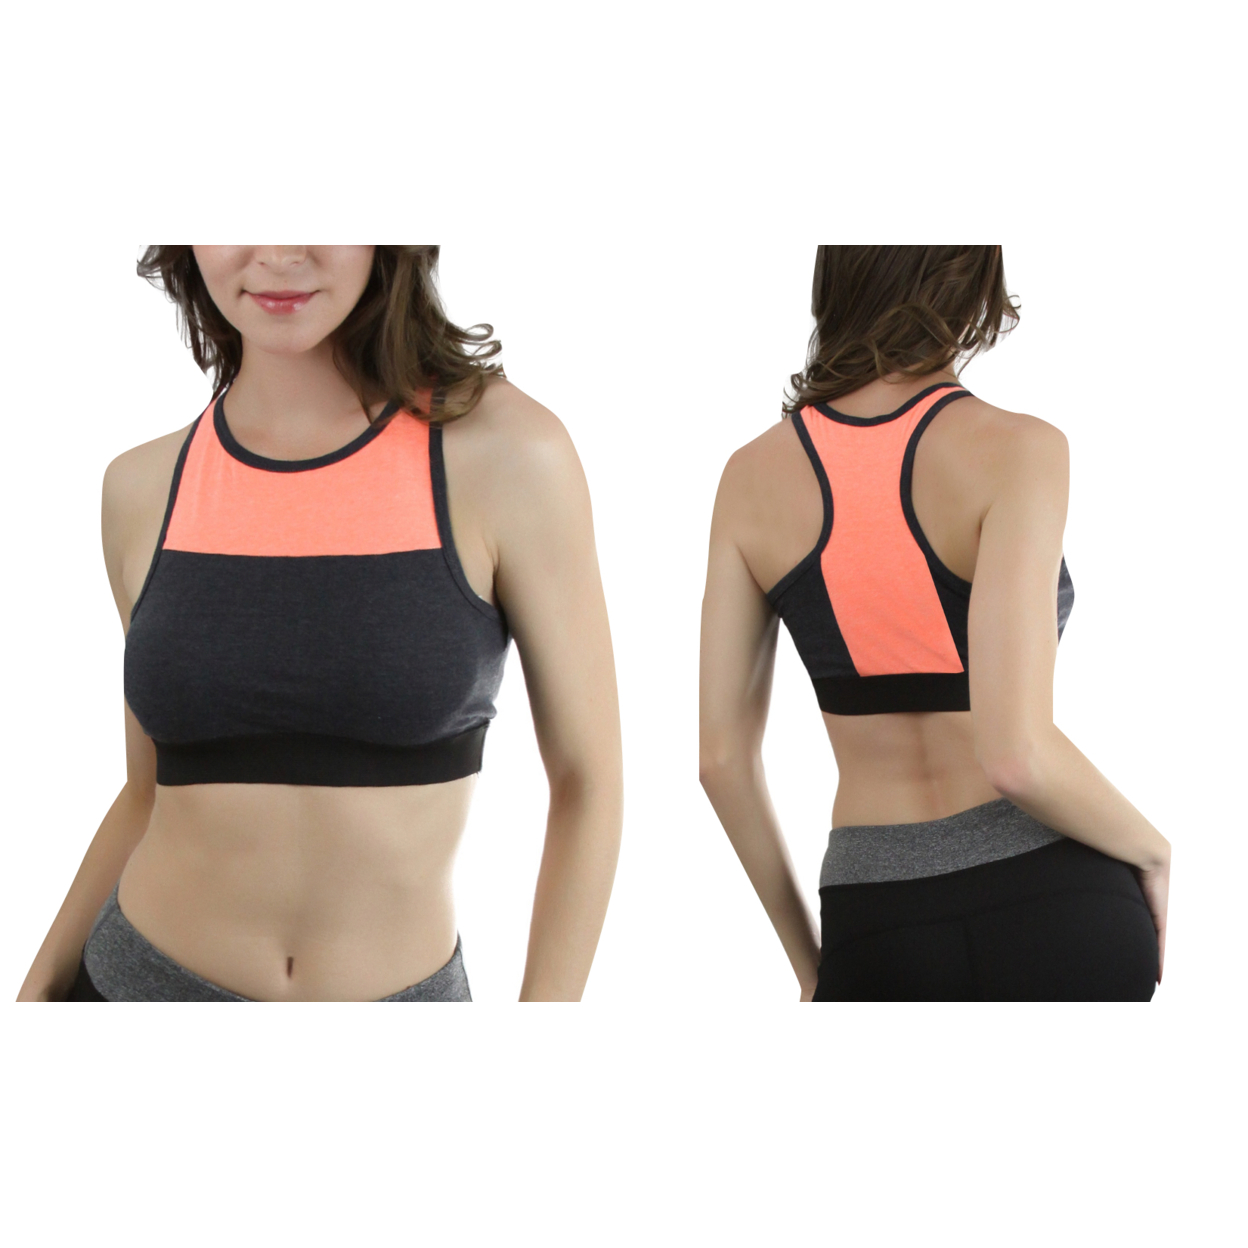 Single Or 2-Pack Of Women's Color-Block Two Tone Cotton-Blend Bra - Charcoal/Neon Coral, Medium